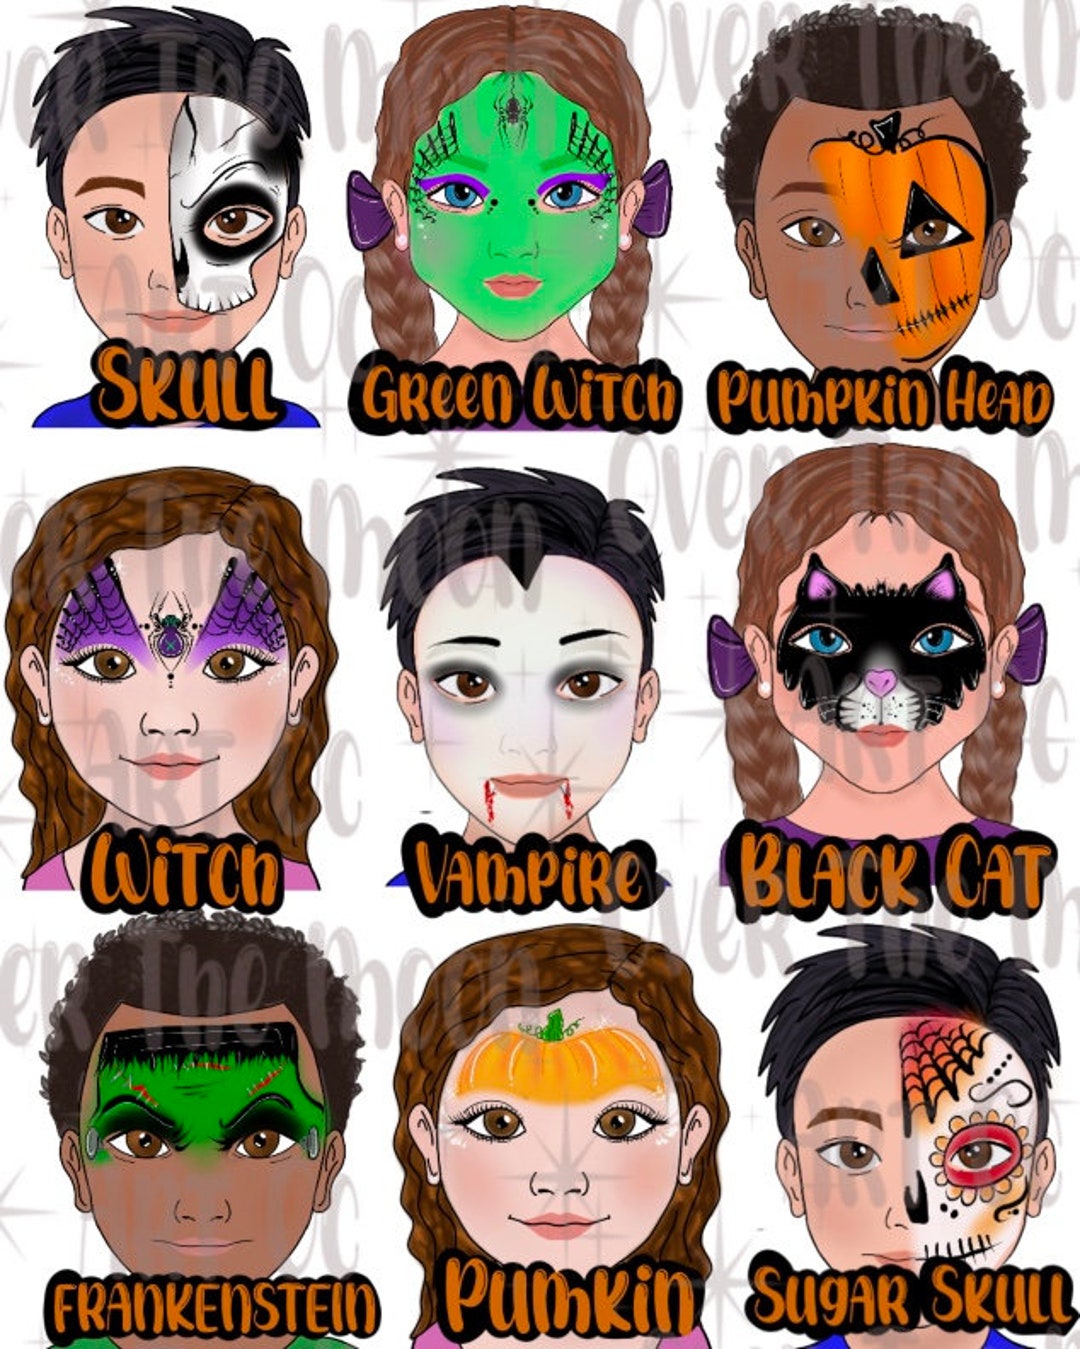 Face Painting Menu Board Digital Fast Faces Easy Face Painting Ideas 